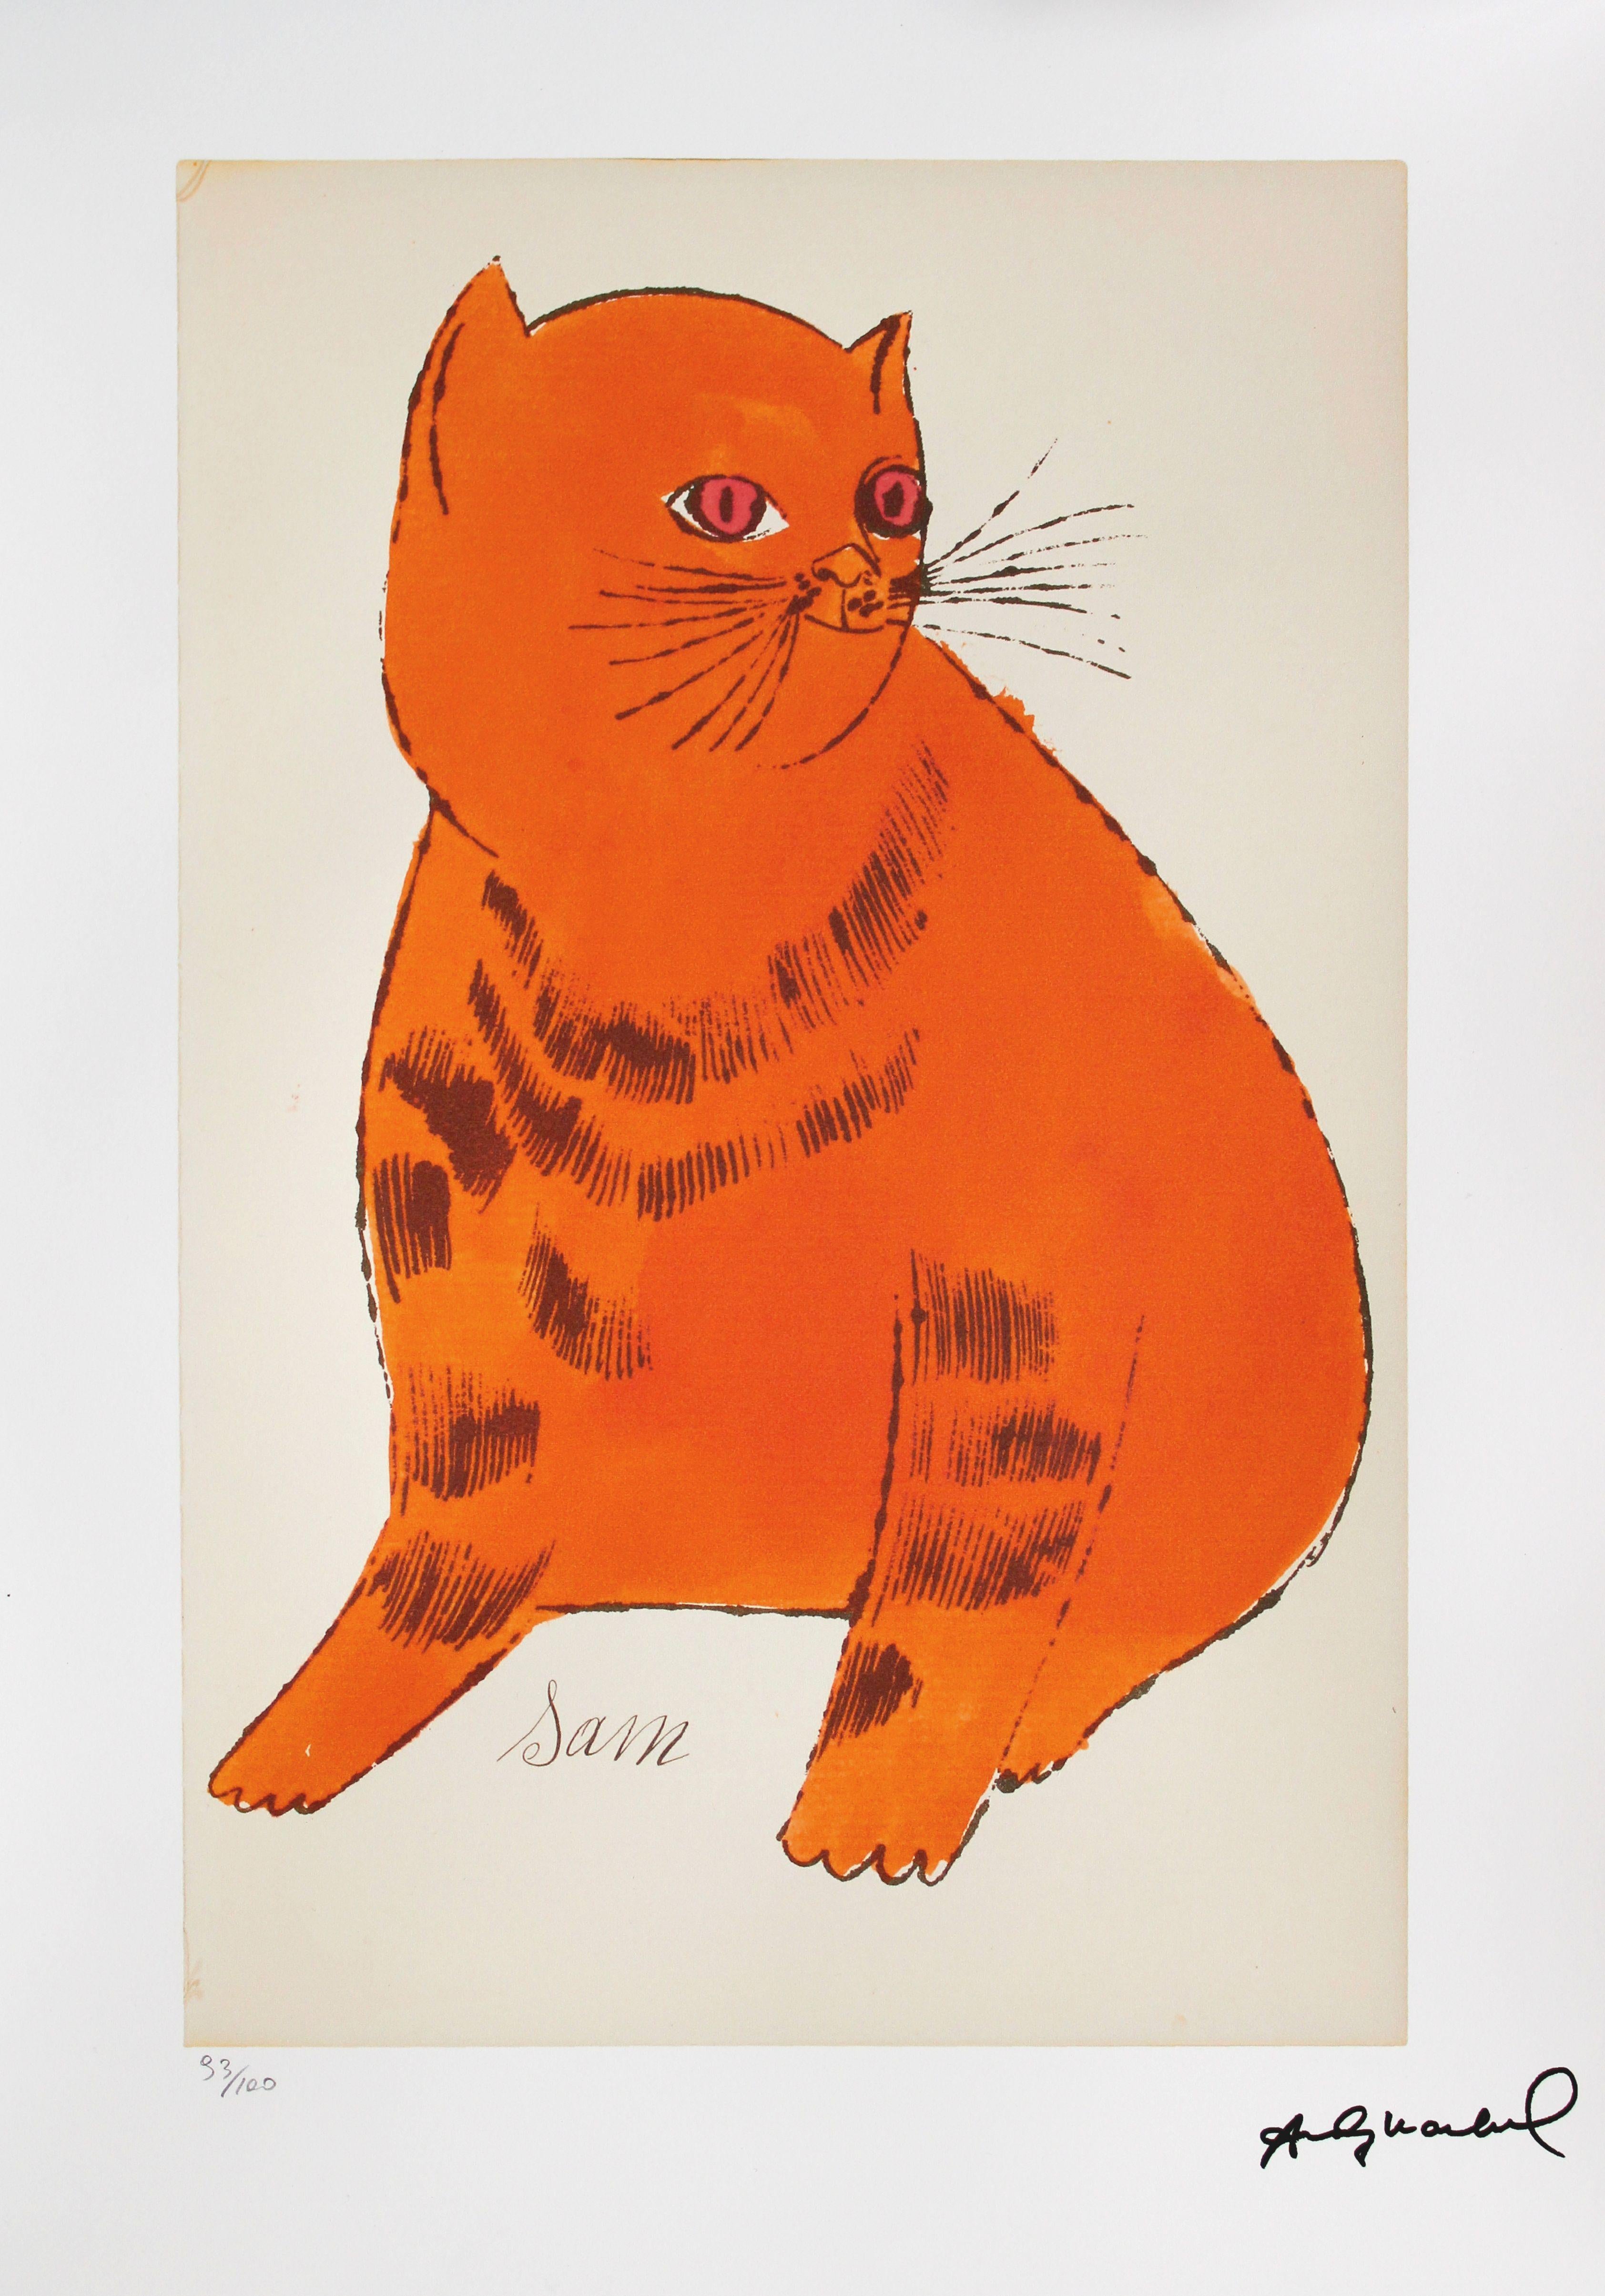 Andy Warhol Print - Red cat  93/100. Lithography, offset printing, imprint size 42x27. 5 cm